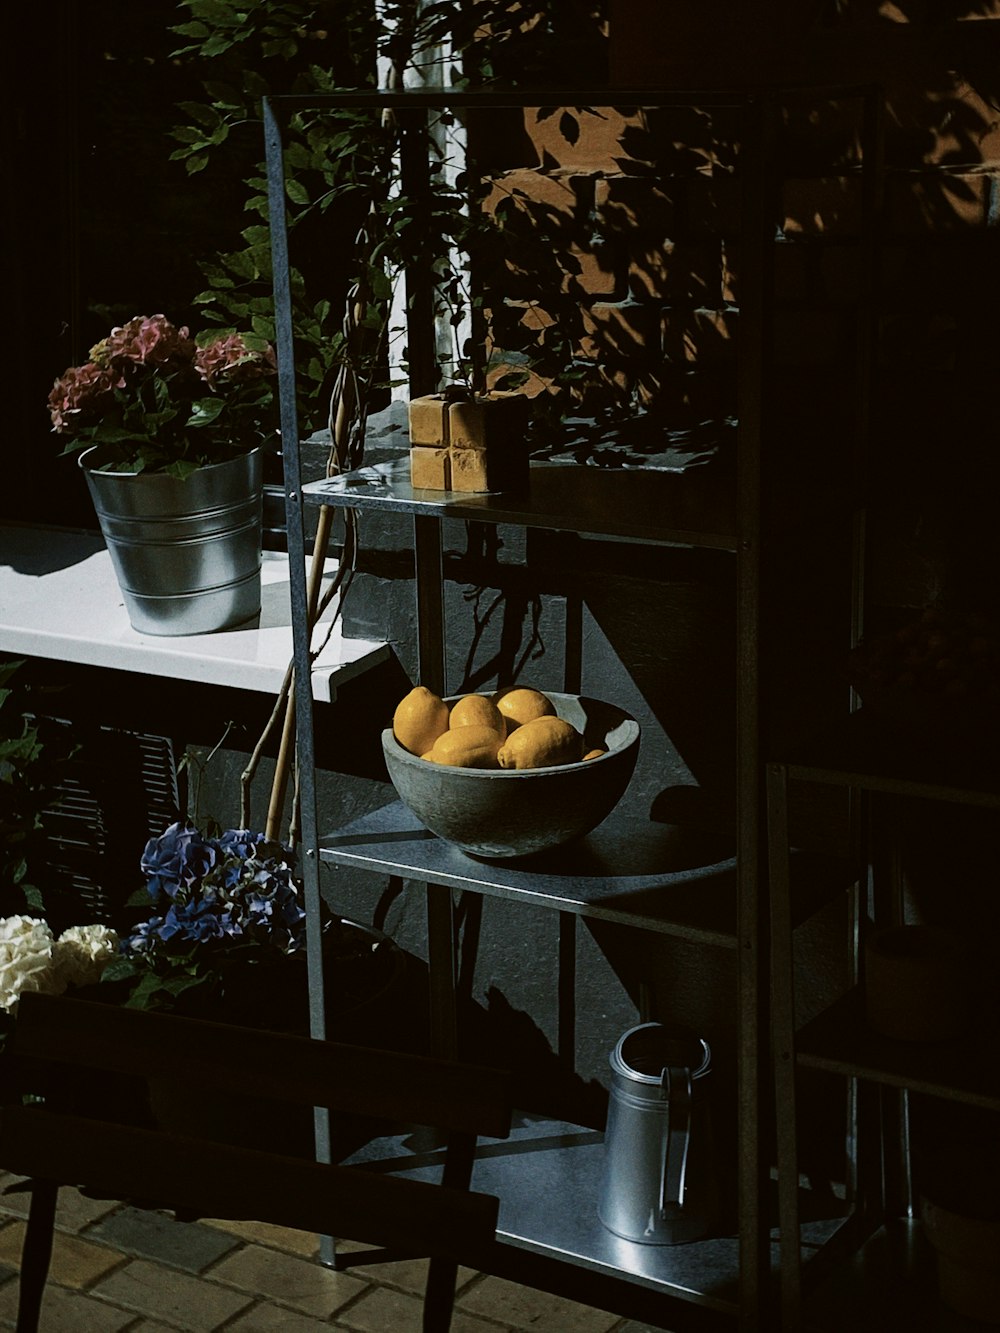 a bowl of oranges sitting on a shelf next to a potted plant